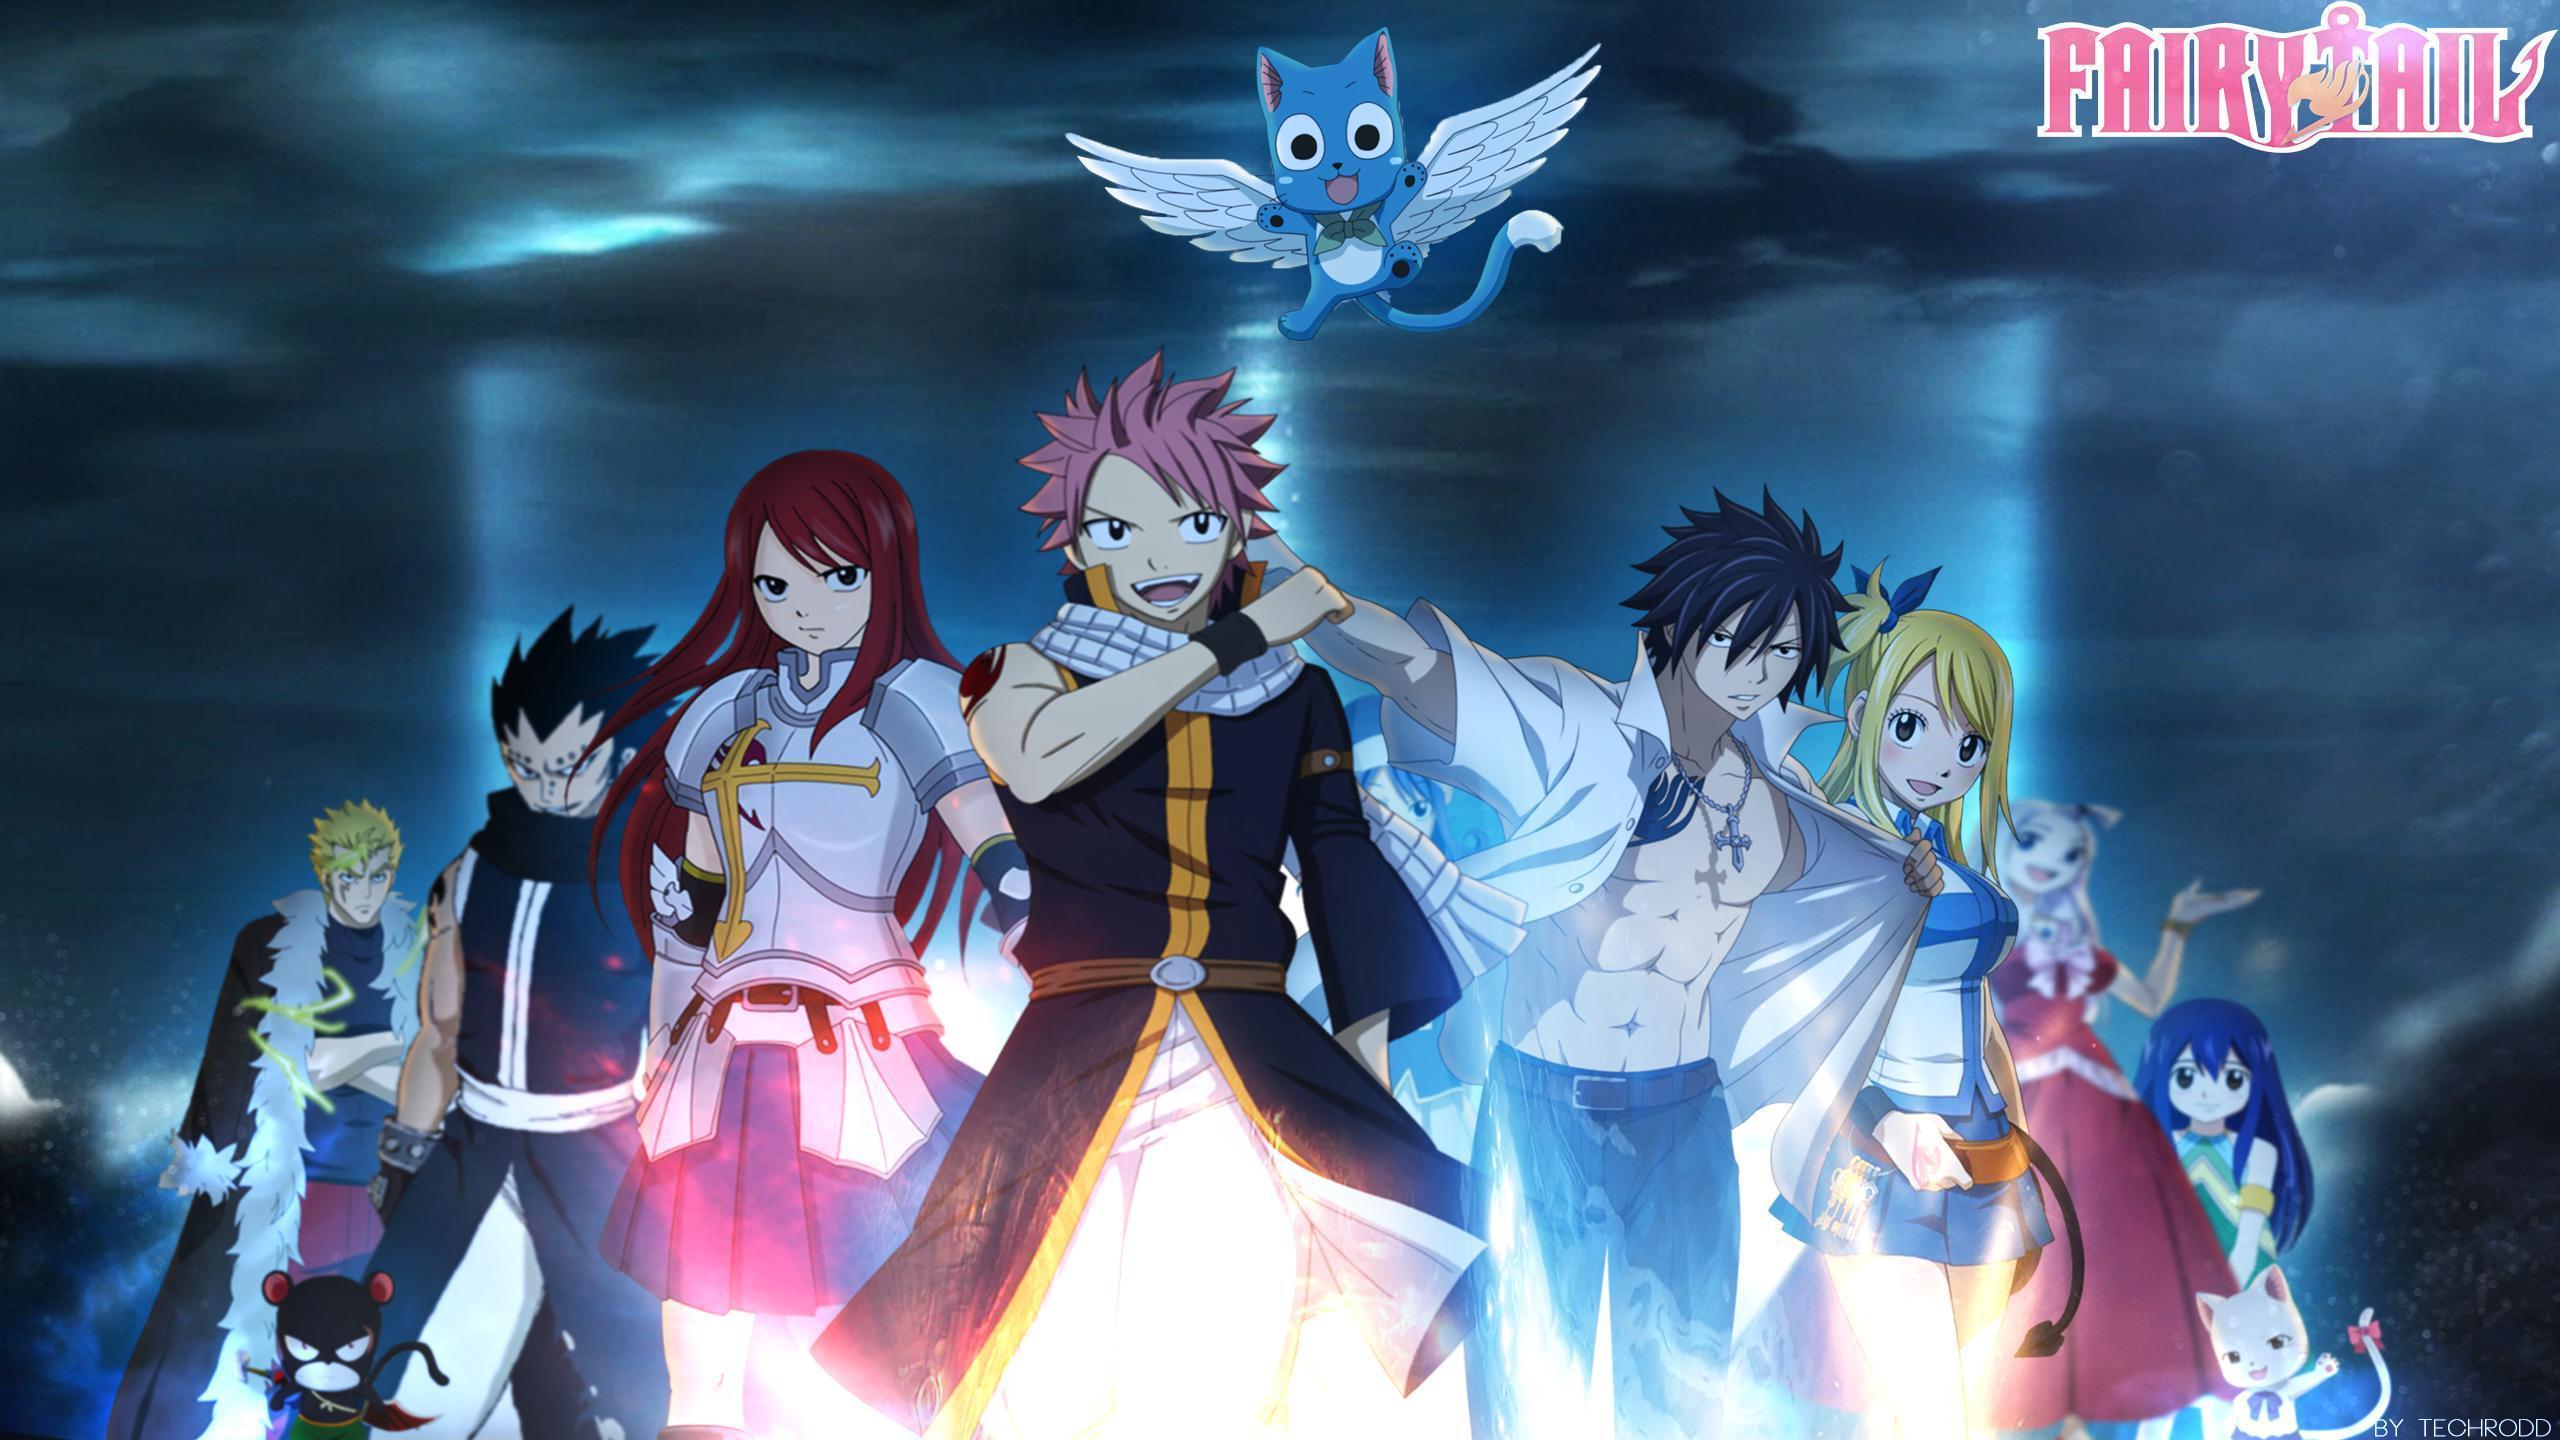 Fairy Tail Wallpapers For Free, Fairy Tail, Anime